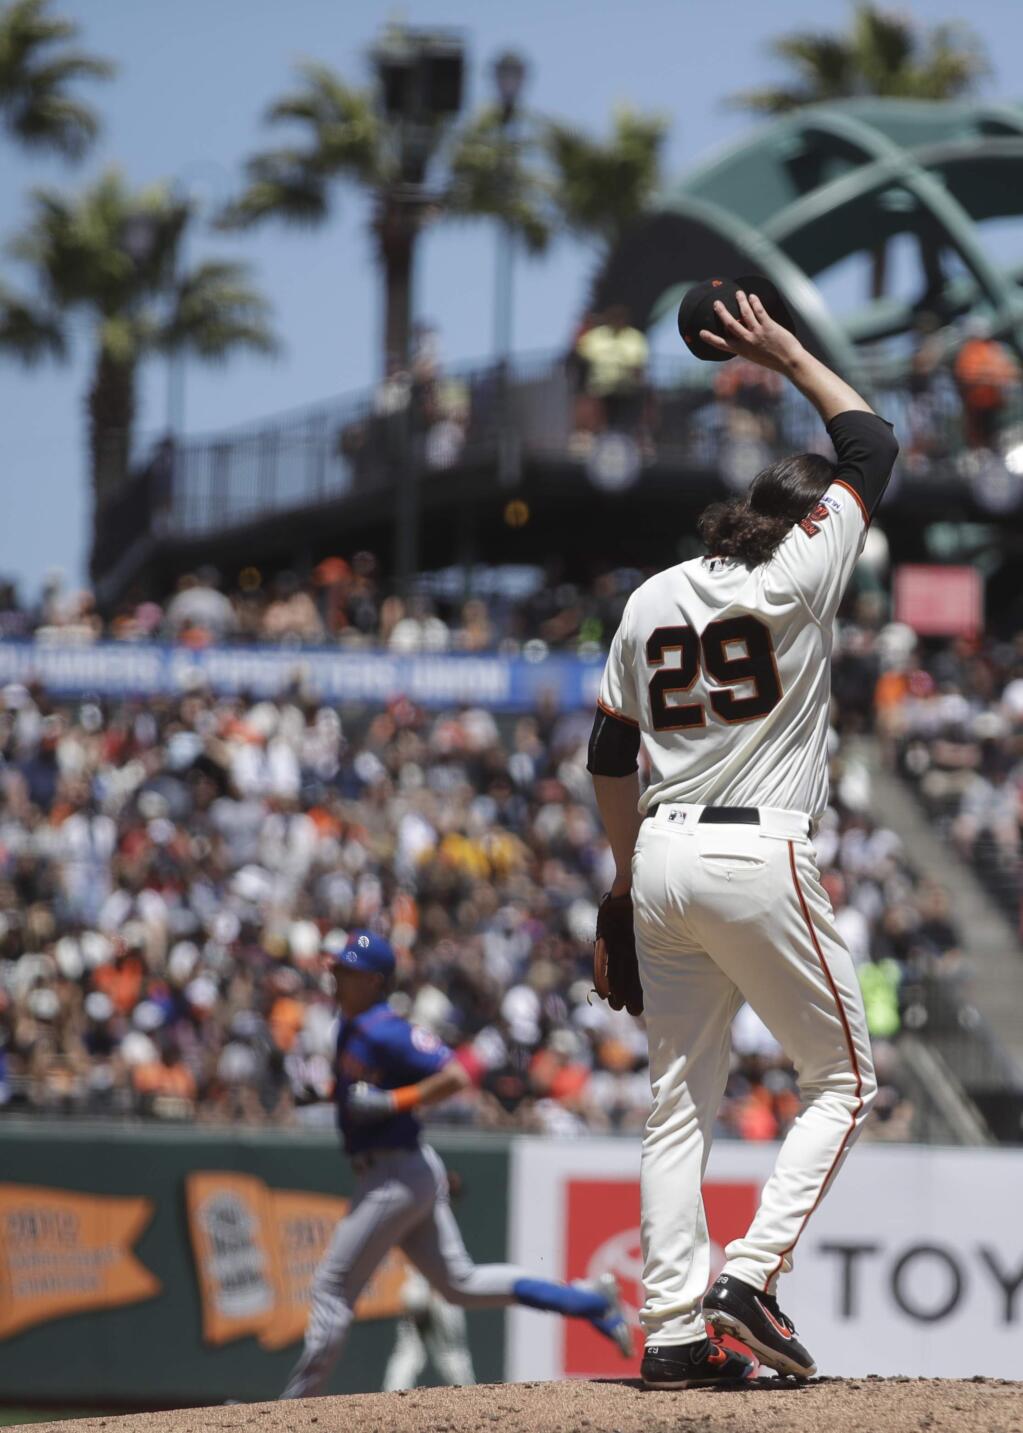 San Francisco Giants pitcher Jeff Samardzija wipes his face as the New York Mets' Jeff McNeil, left, runs the bases after hitting a two-run home run in the fifth inning Saturday, July 20, 2019, in San Francisco. (AP Photo/Ben Margot)